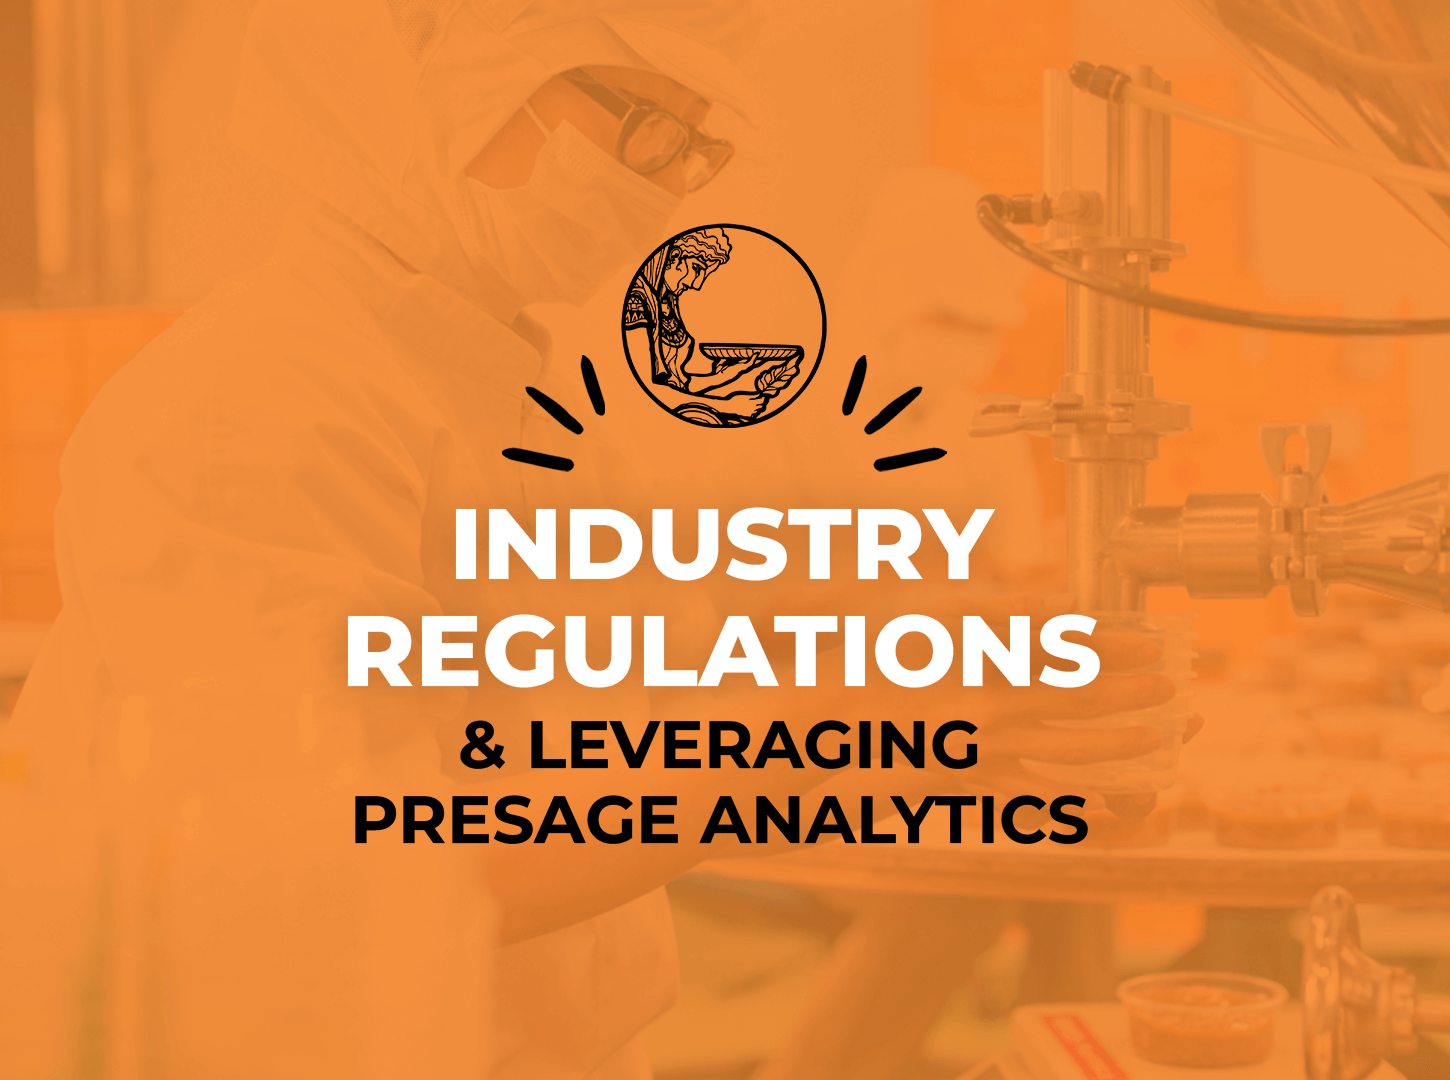 Featured image for “Industry Regulations & Leveraging Presage Analytics”